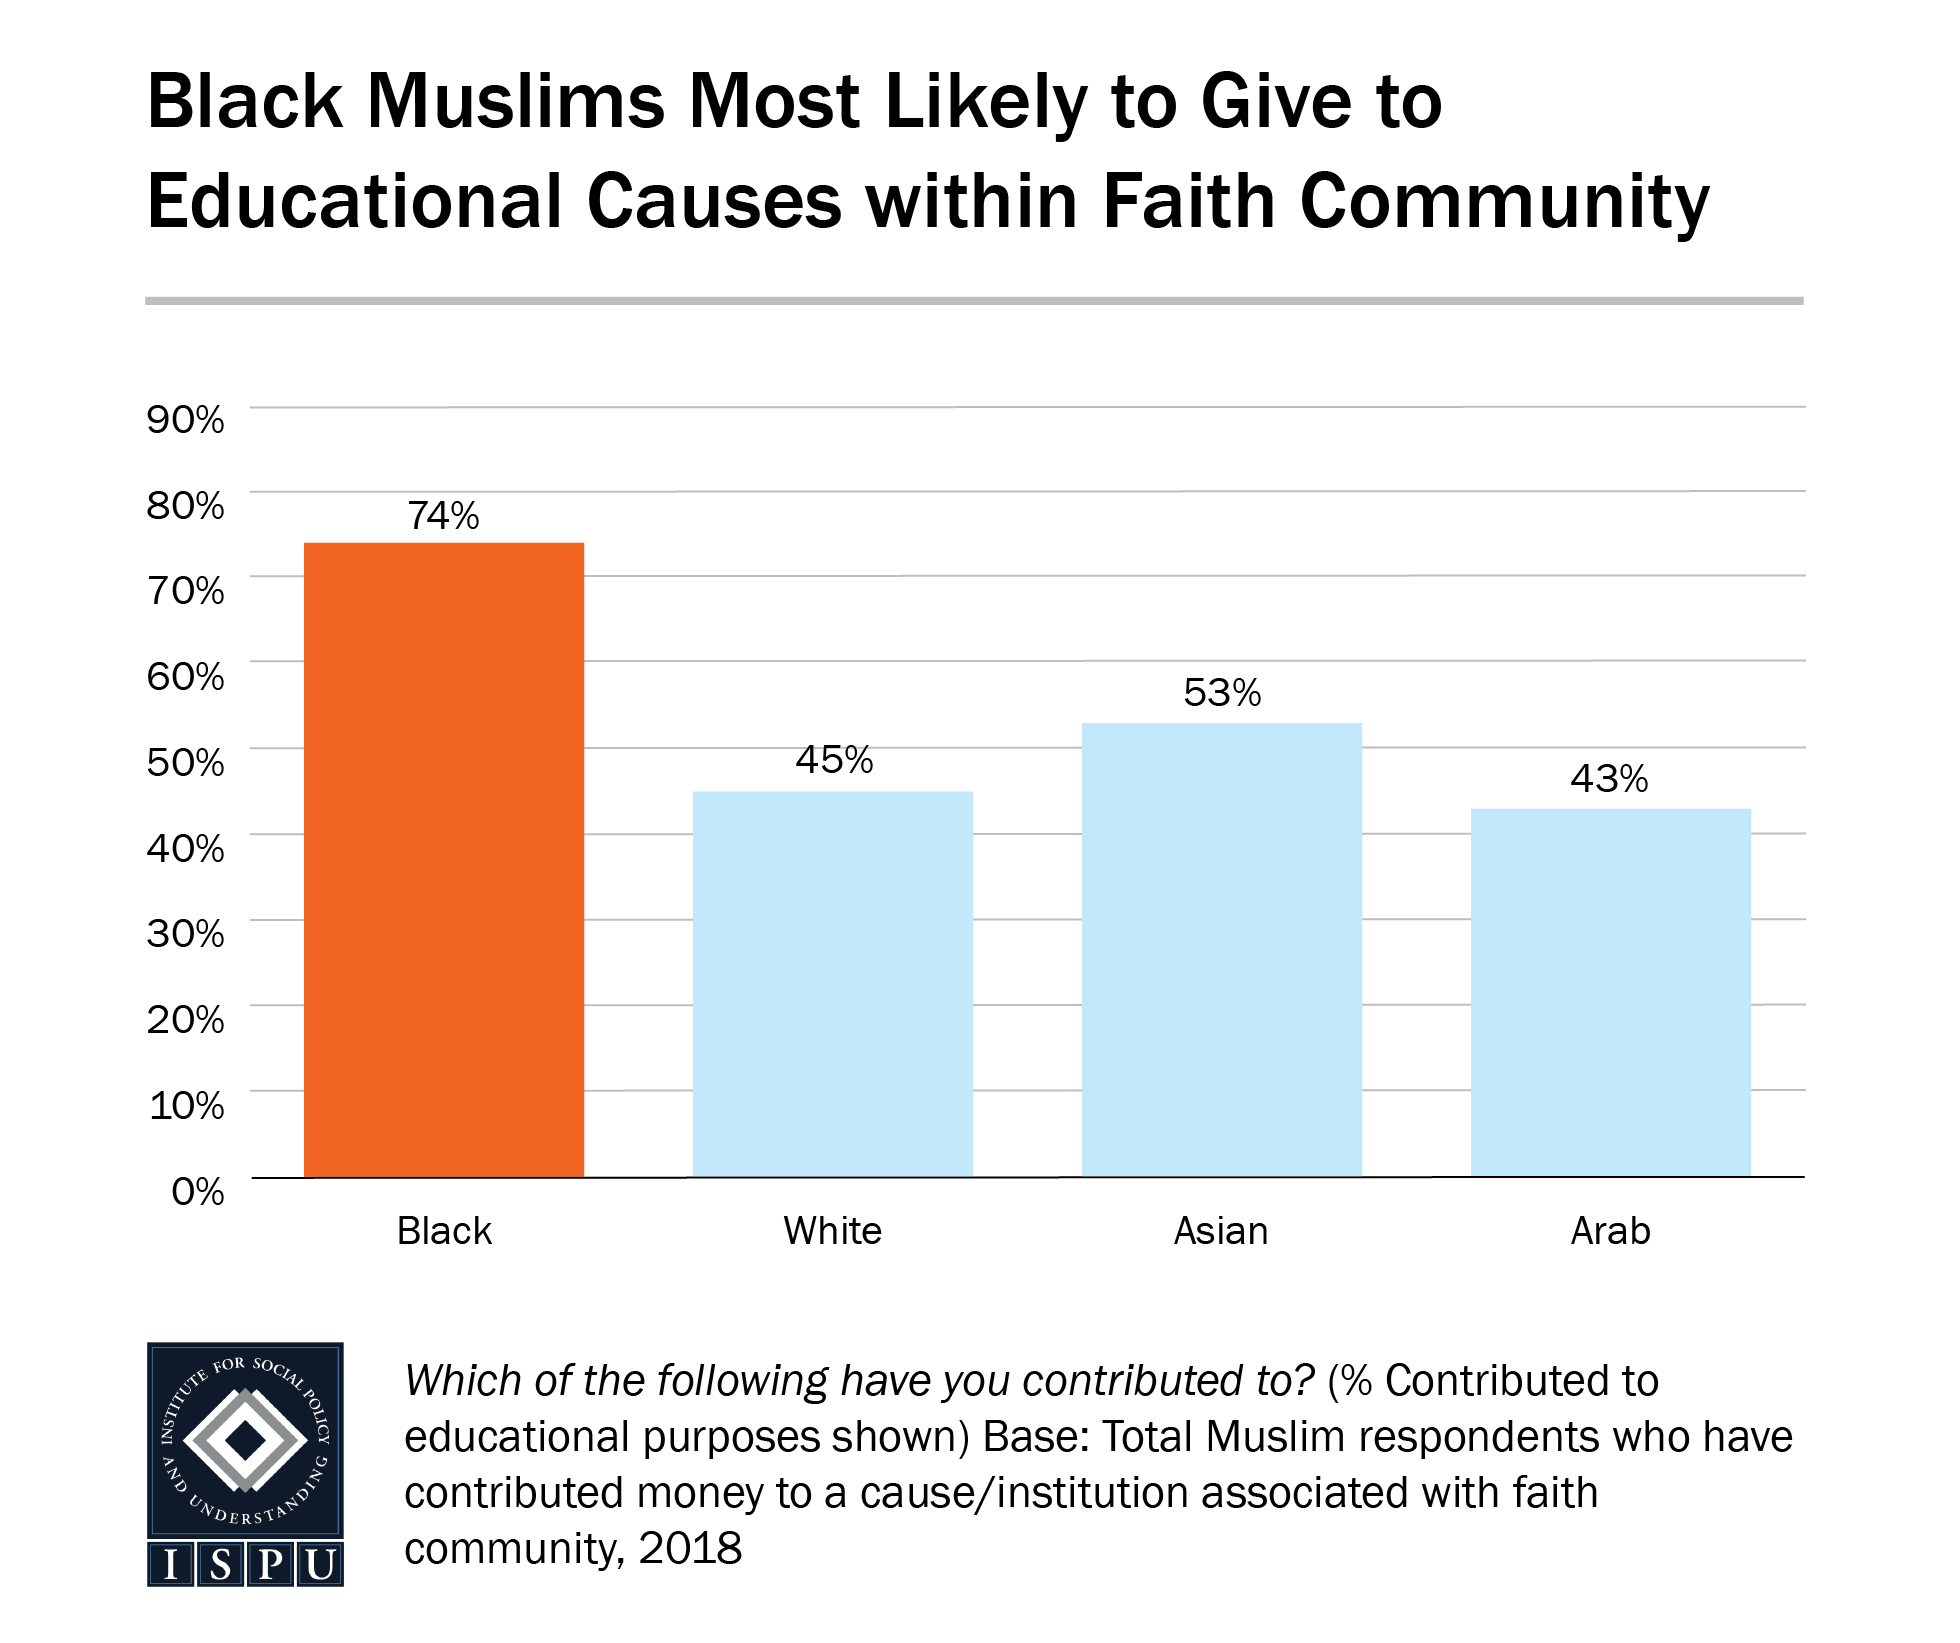 A bar graph showing that Black Muslims are the most likely racial/ethnic group among Muslims to give to education causes within their faith community